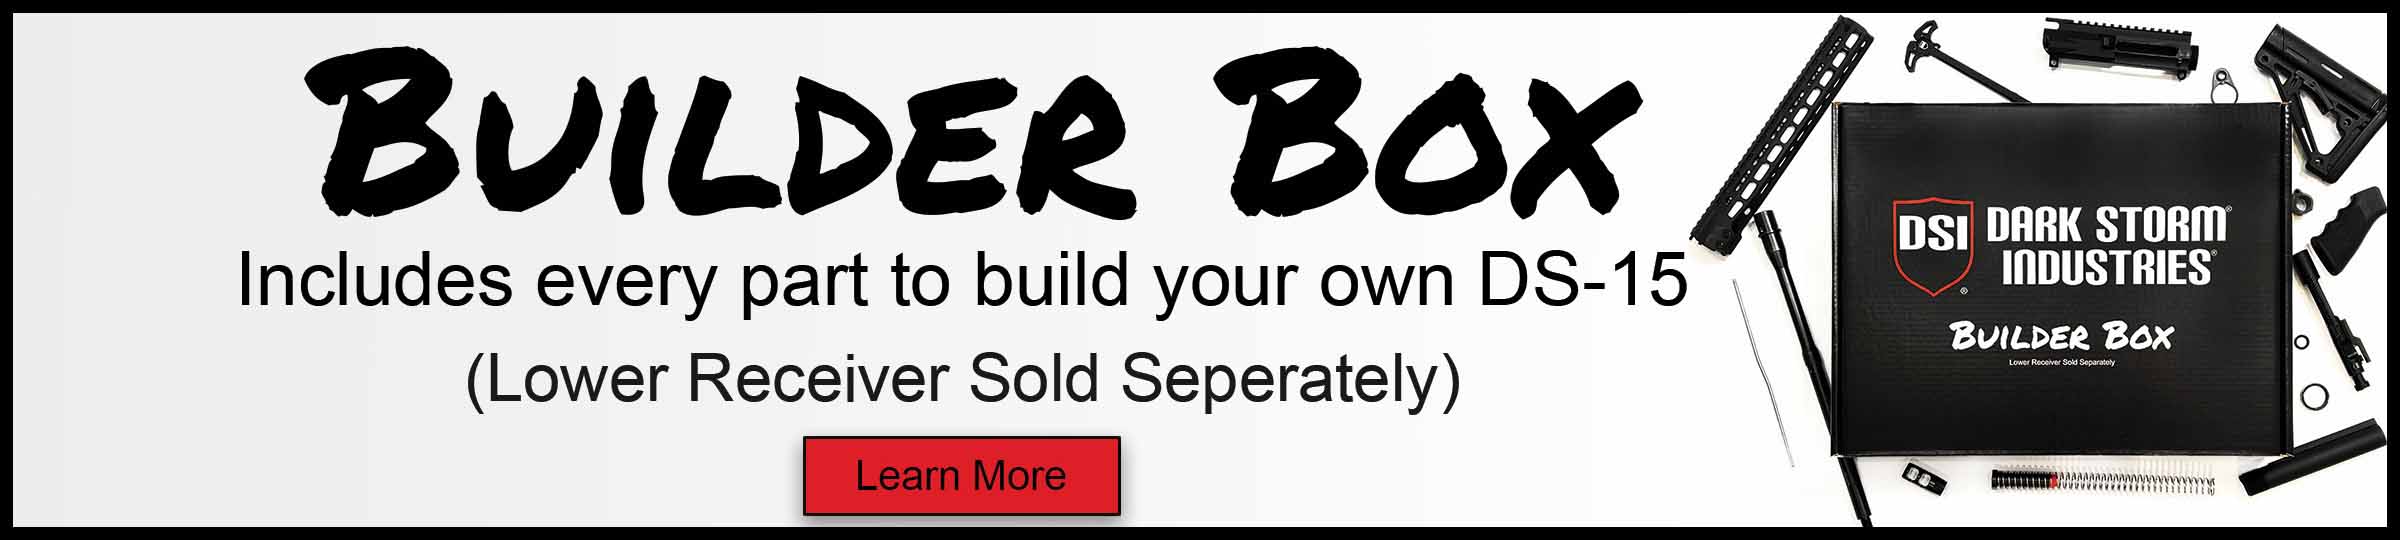 Builders box build your own AR15 kit